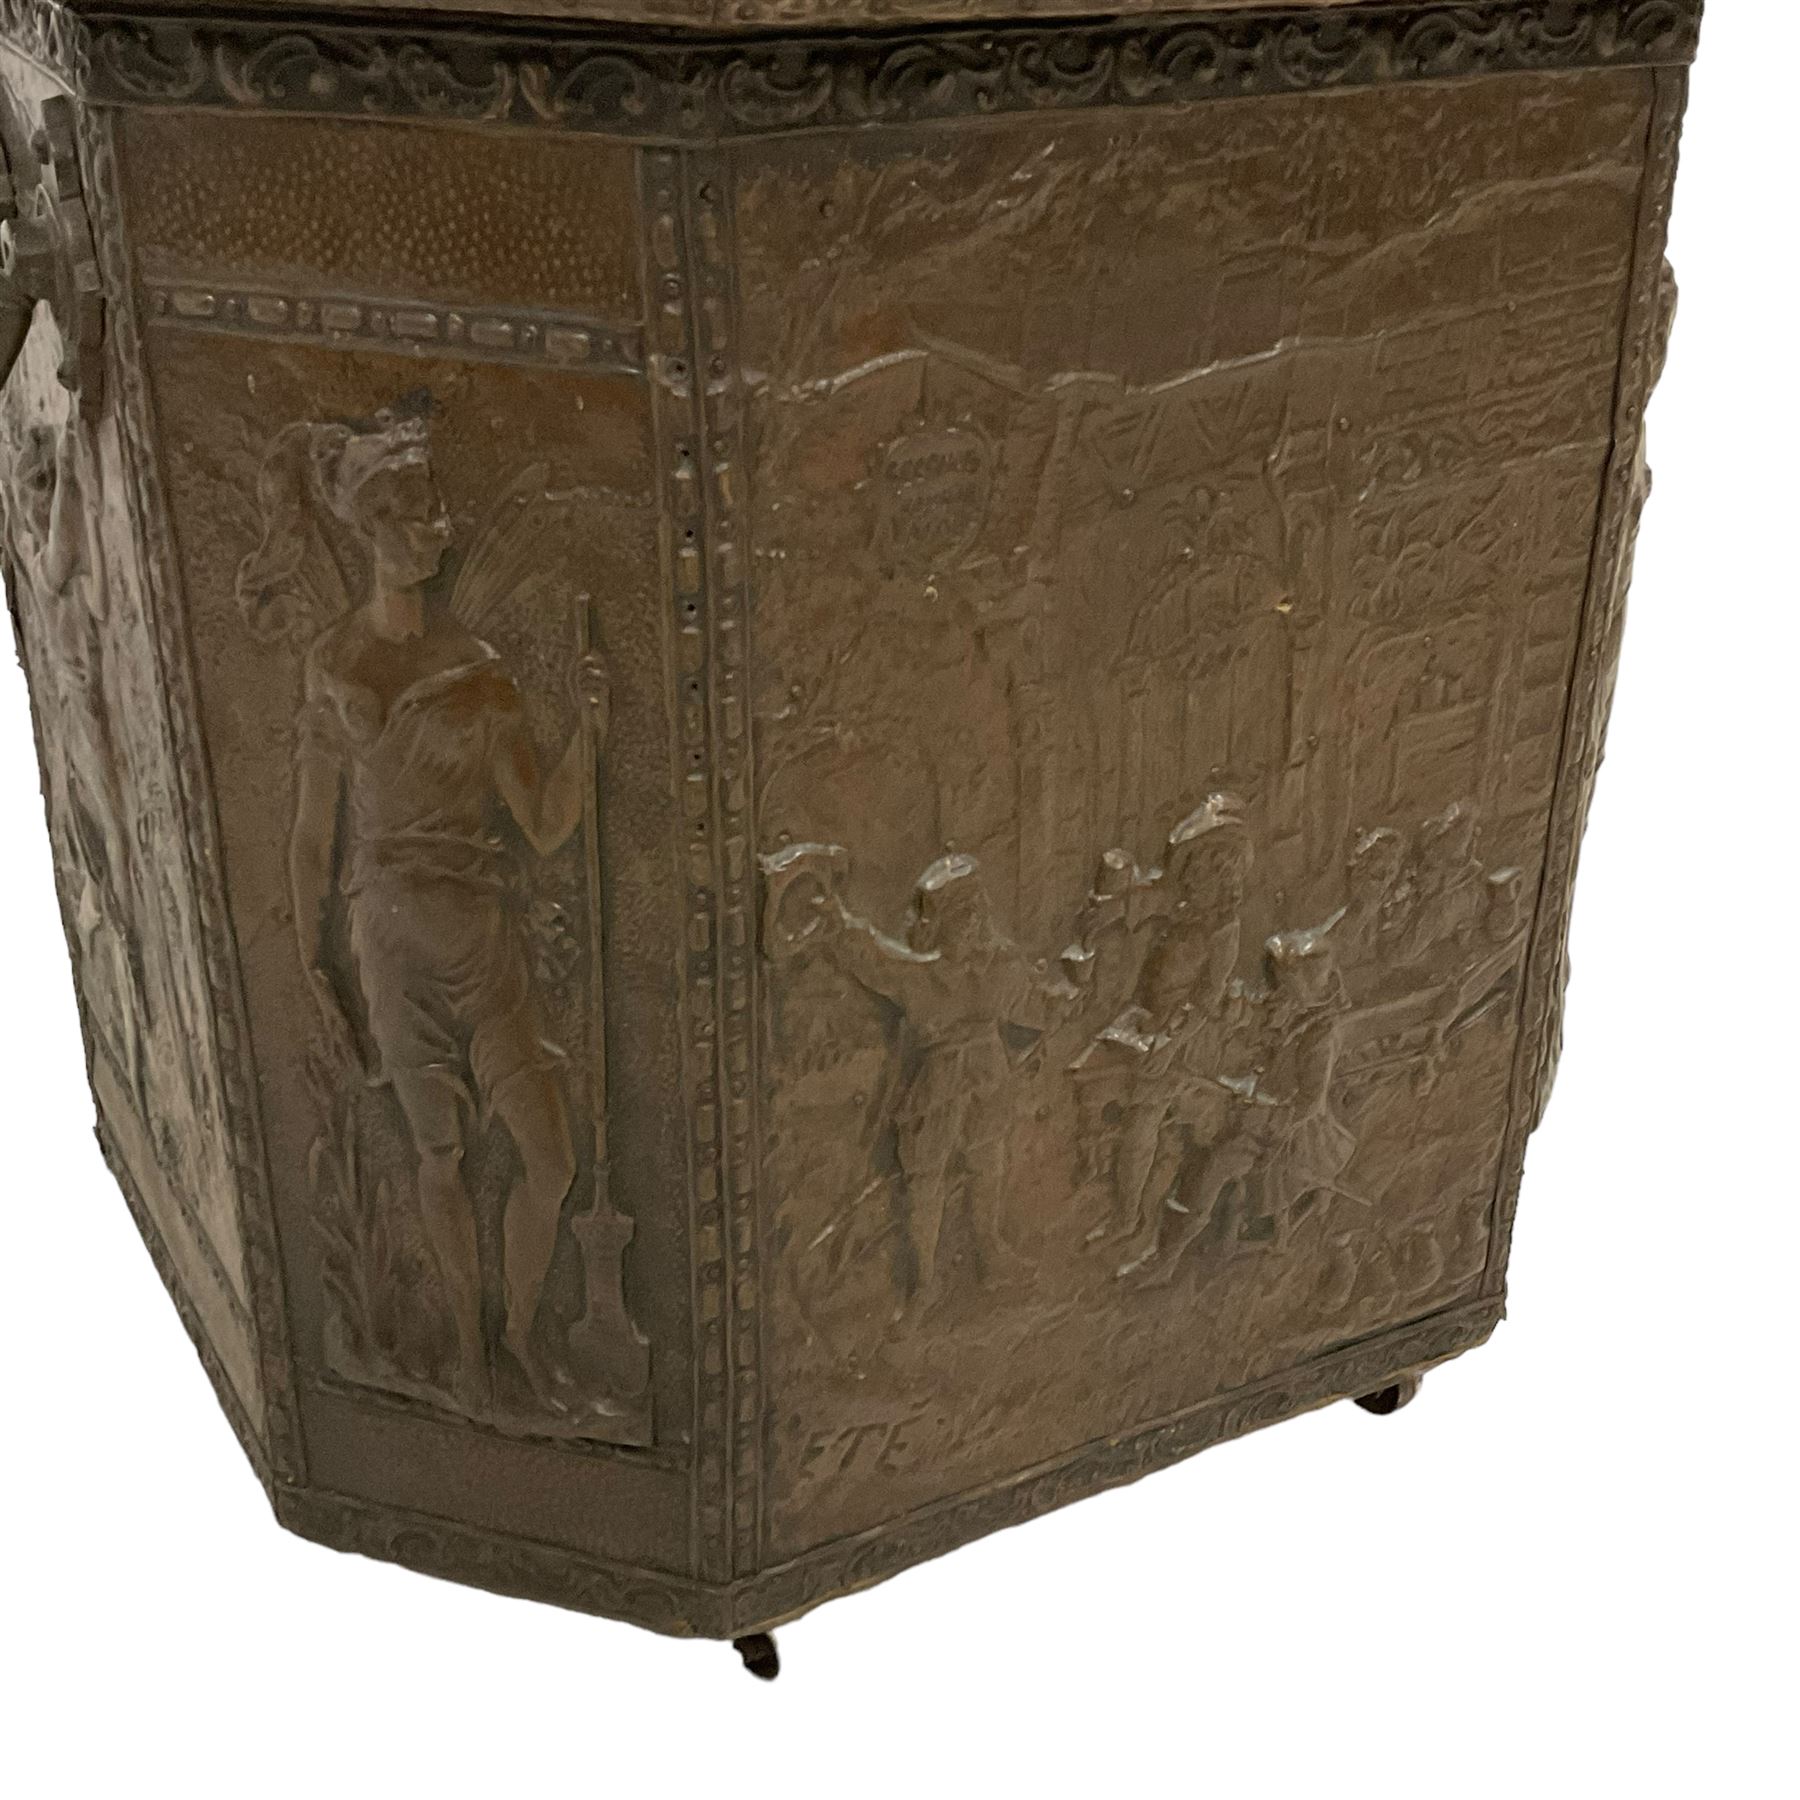 Large 19th century wooden and brass repousse coal box - Image 5 of 7